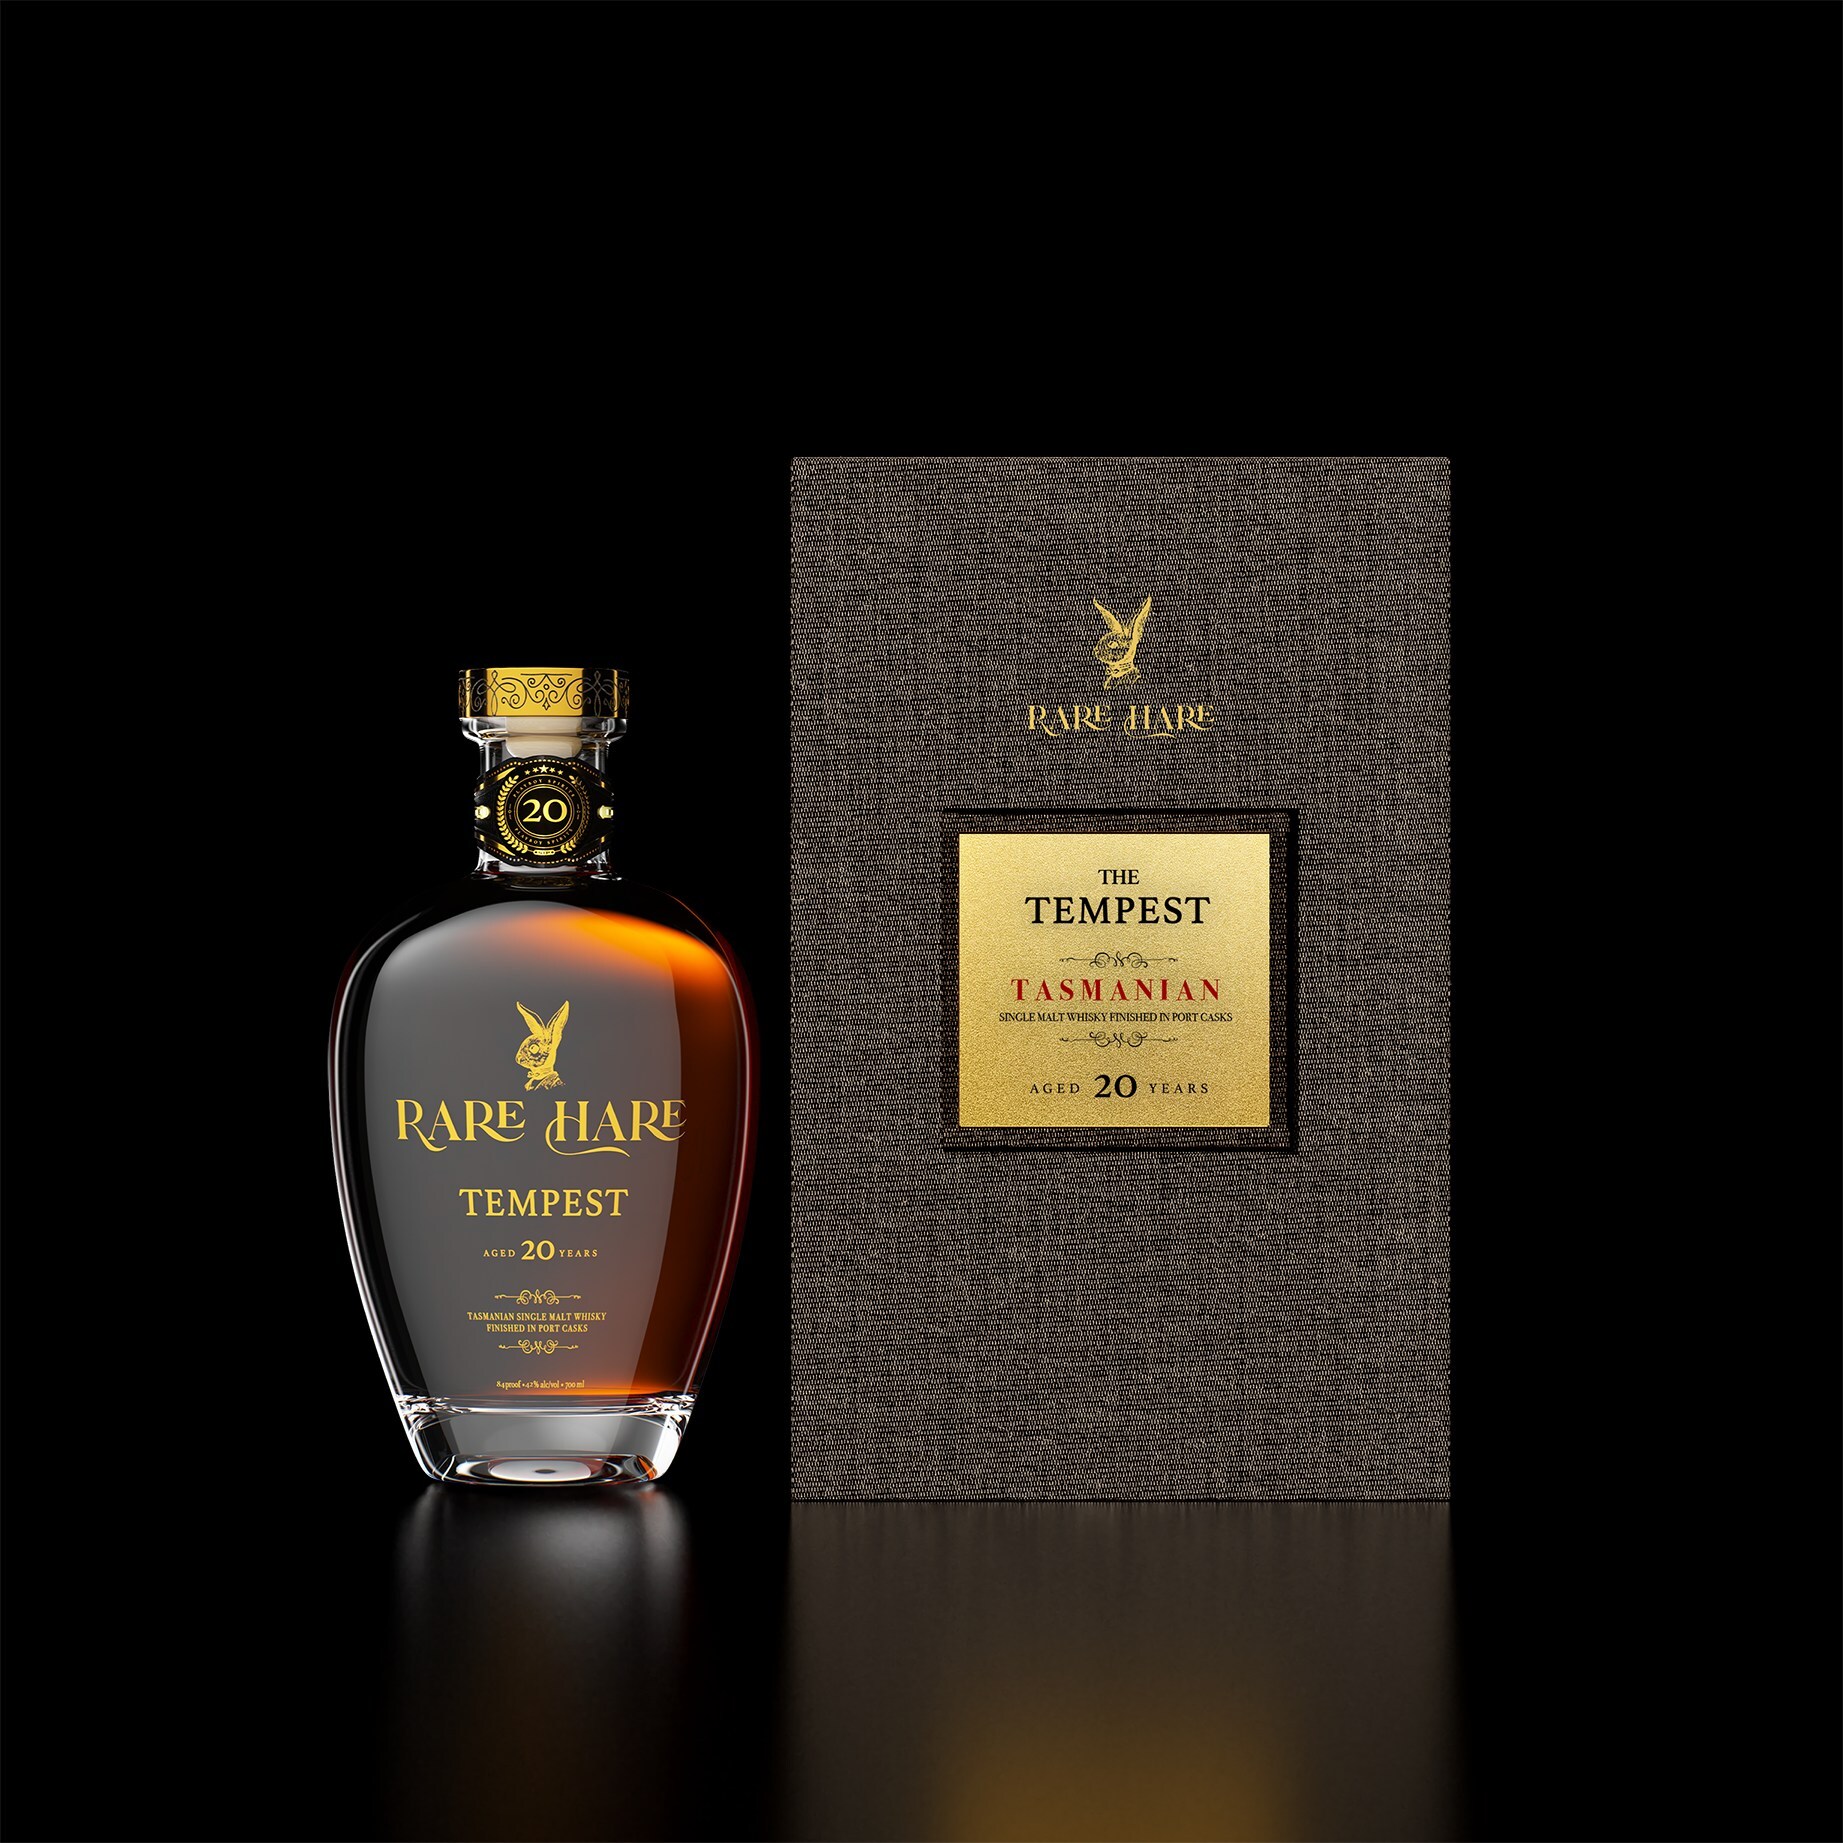 Playboy’s Rare Hare Spirits Just Released a 20 Year Old Tasmanian Whisky